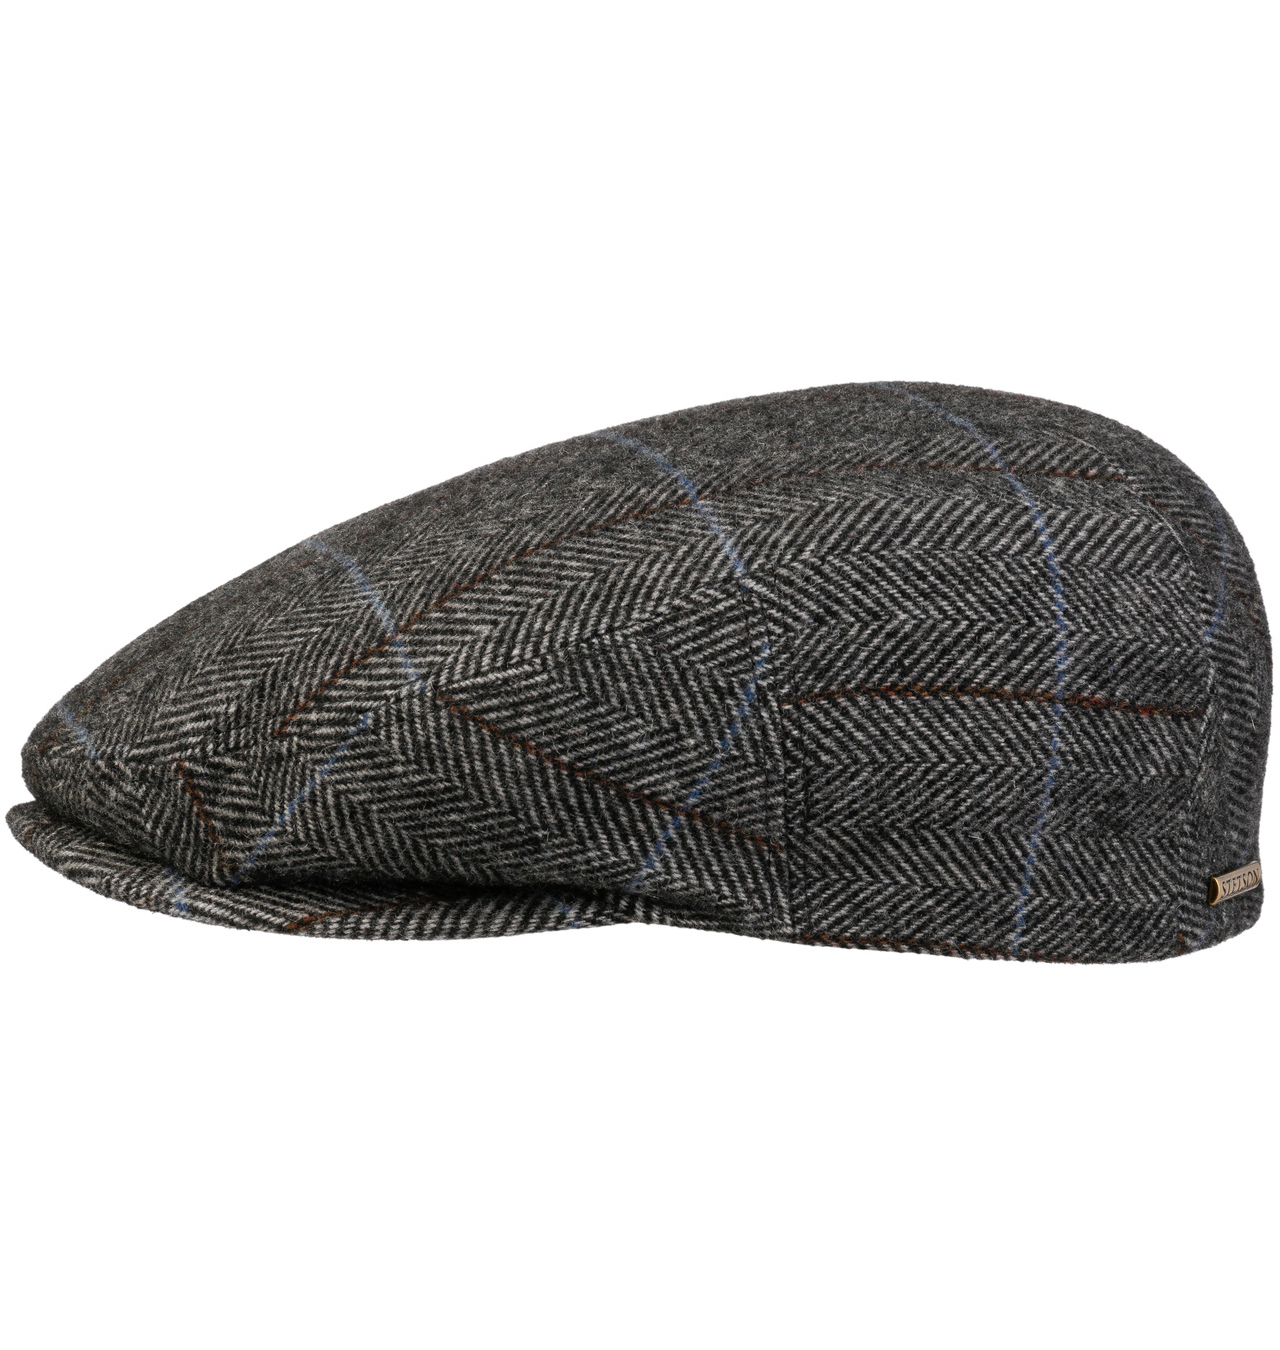 Stetson---Kent-Wool-Ivy-Cap-With-Earflaps---Grey-Black1